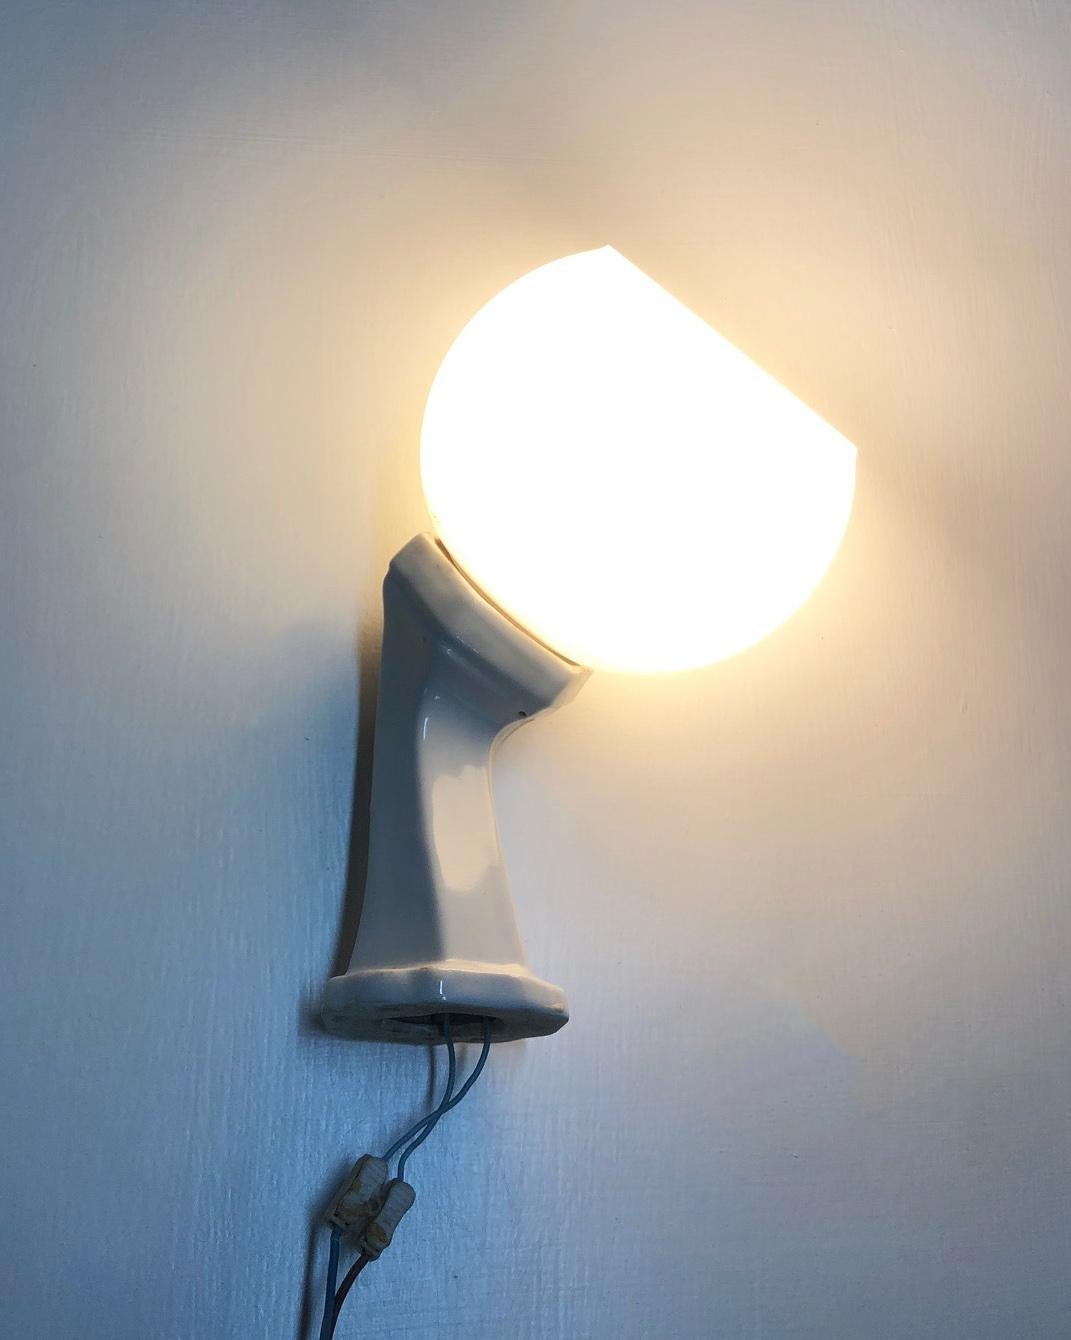 Italian wall lamp in white porcelain, with glass shade, original from 1930s
In working condition.
Equipped with original 20th century European wiring.
We recommend buyer consults an experienced electrician for proper installation.
The fixture